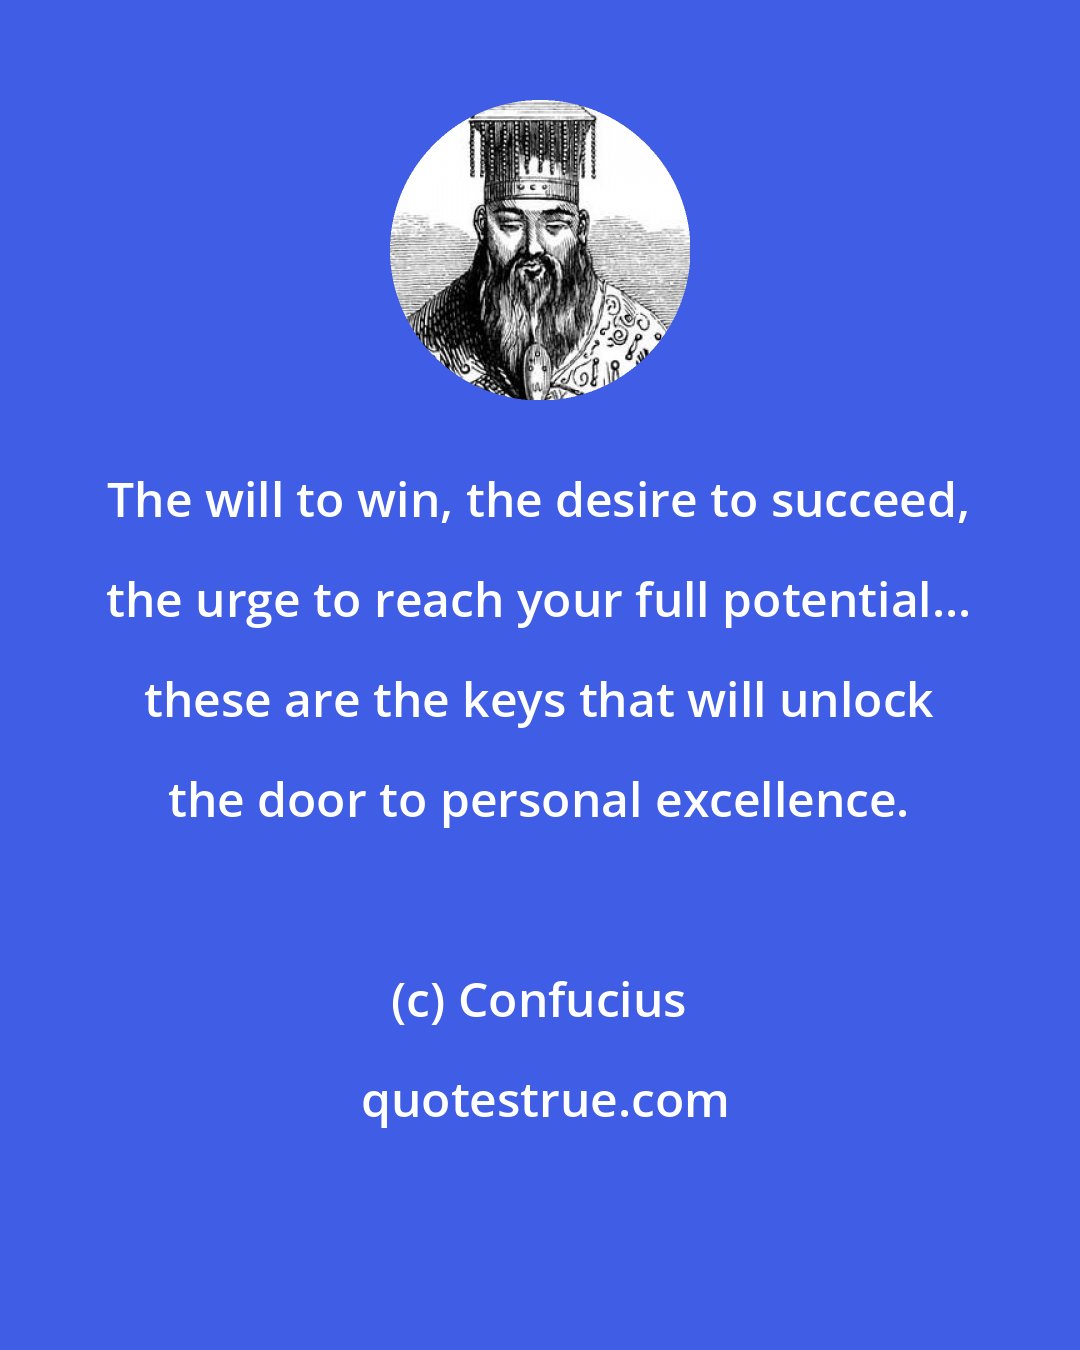 Confucius: The will to win, the desire to succeed, the urge to reach your full potential... these are the keys that will unlock the door to personal excellence.